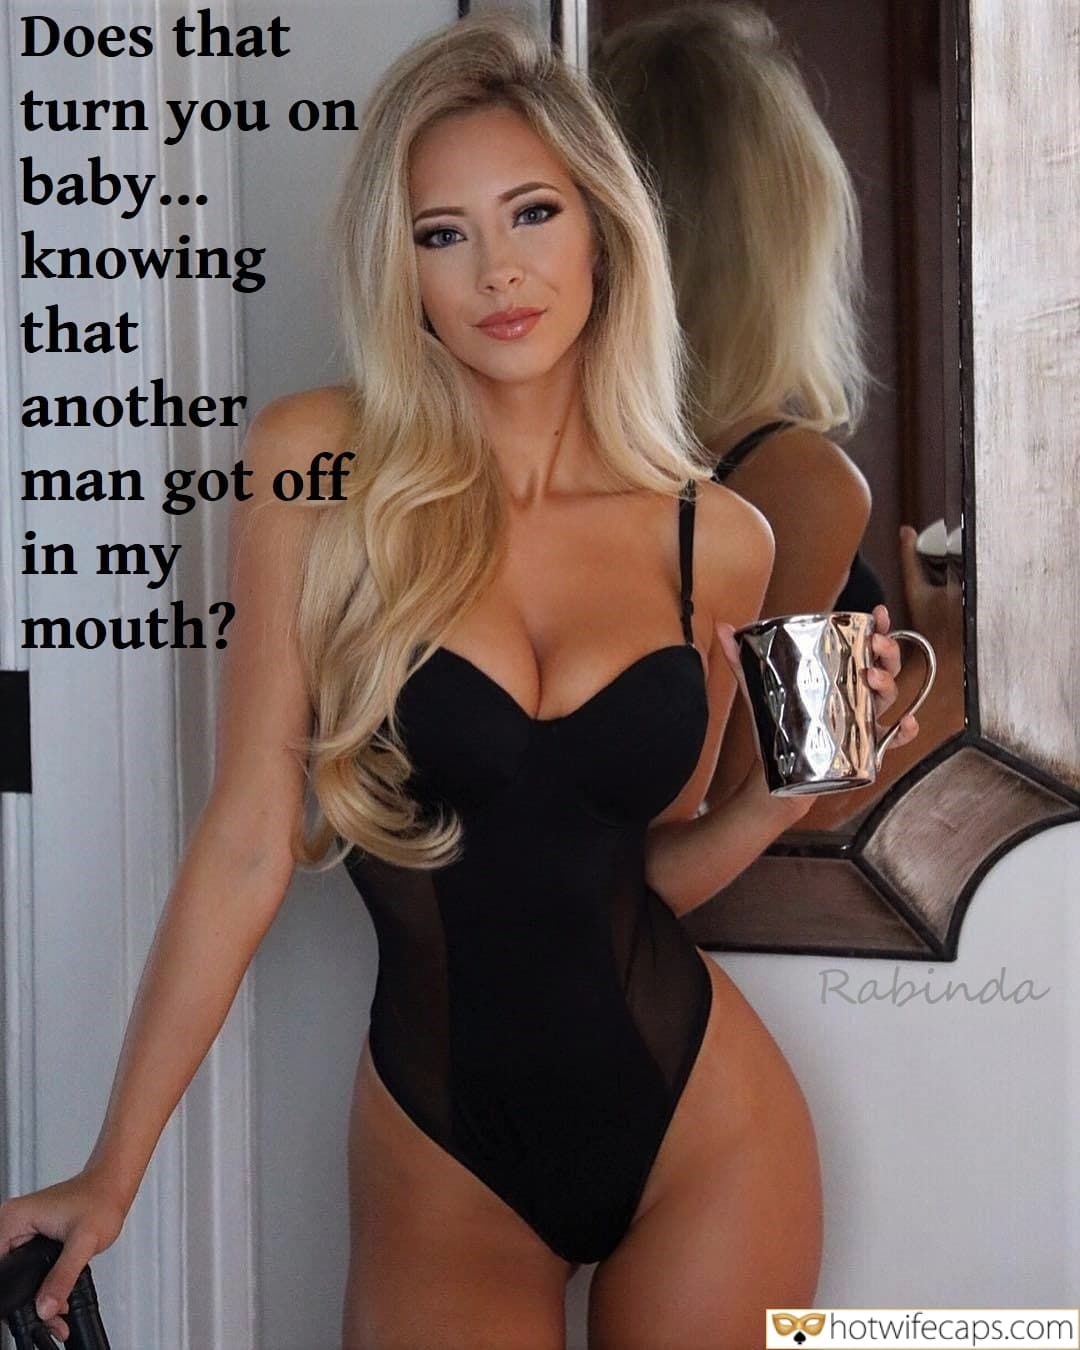 Bigger Cock, Blowjob, Bull, Bully, Sexy Memes, Wife Sharing Hotwife Caption №565248 mature blonde with a perfect body pic